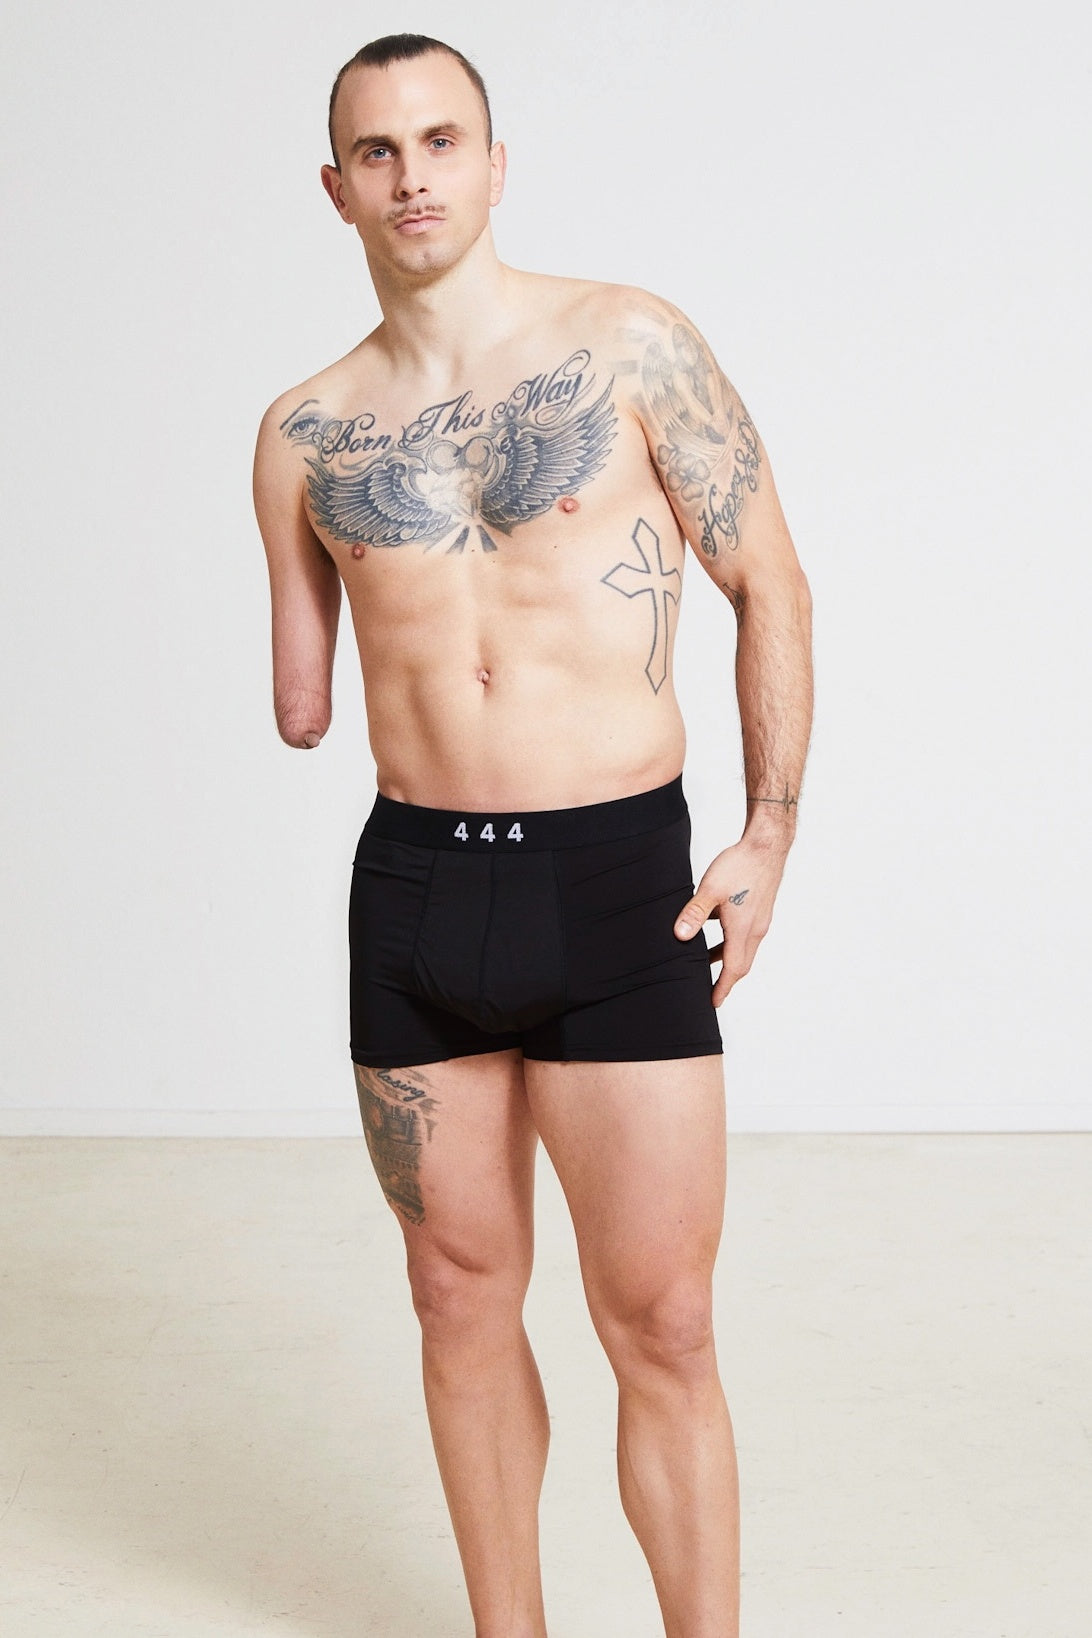 Incontinence underwear for men - Boxers